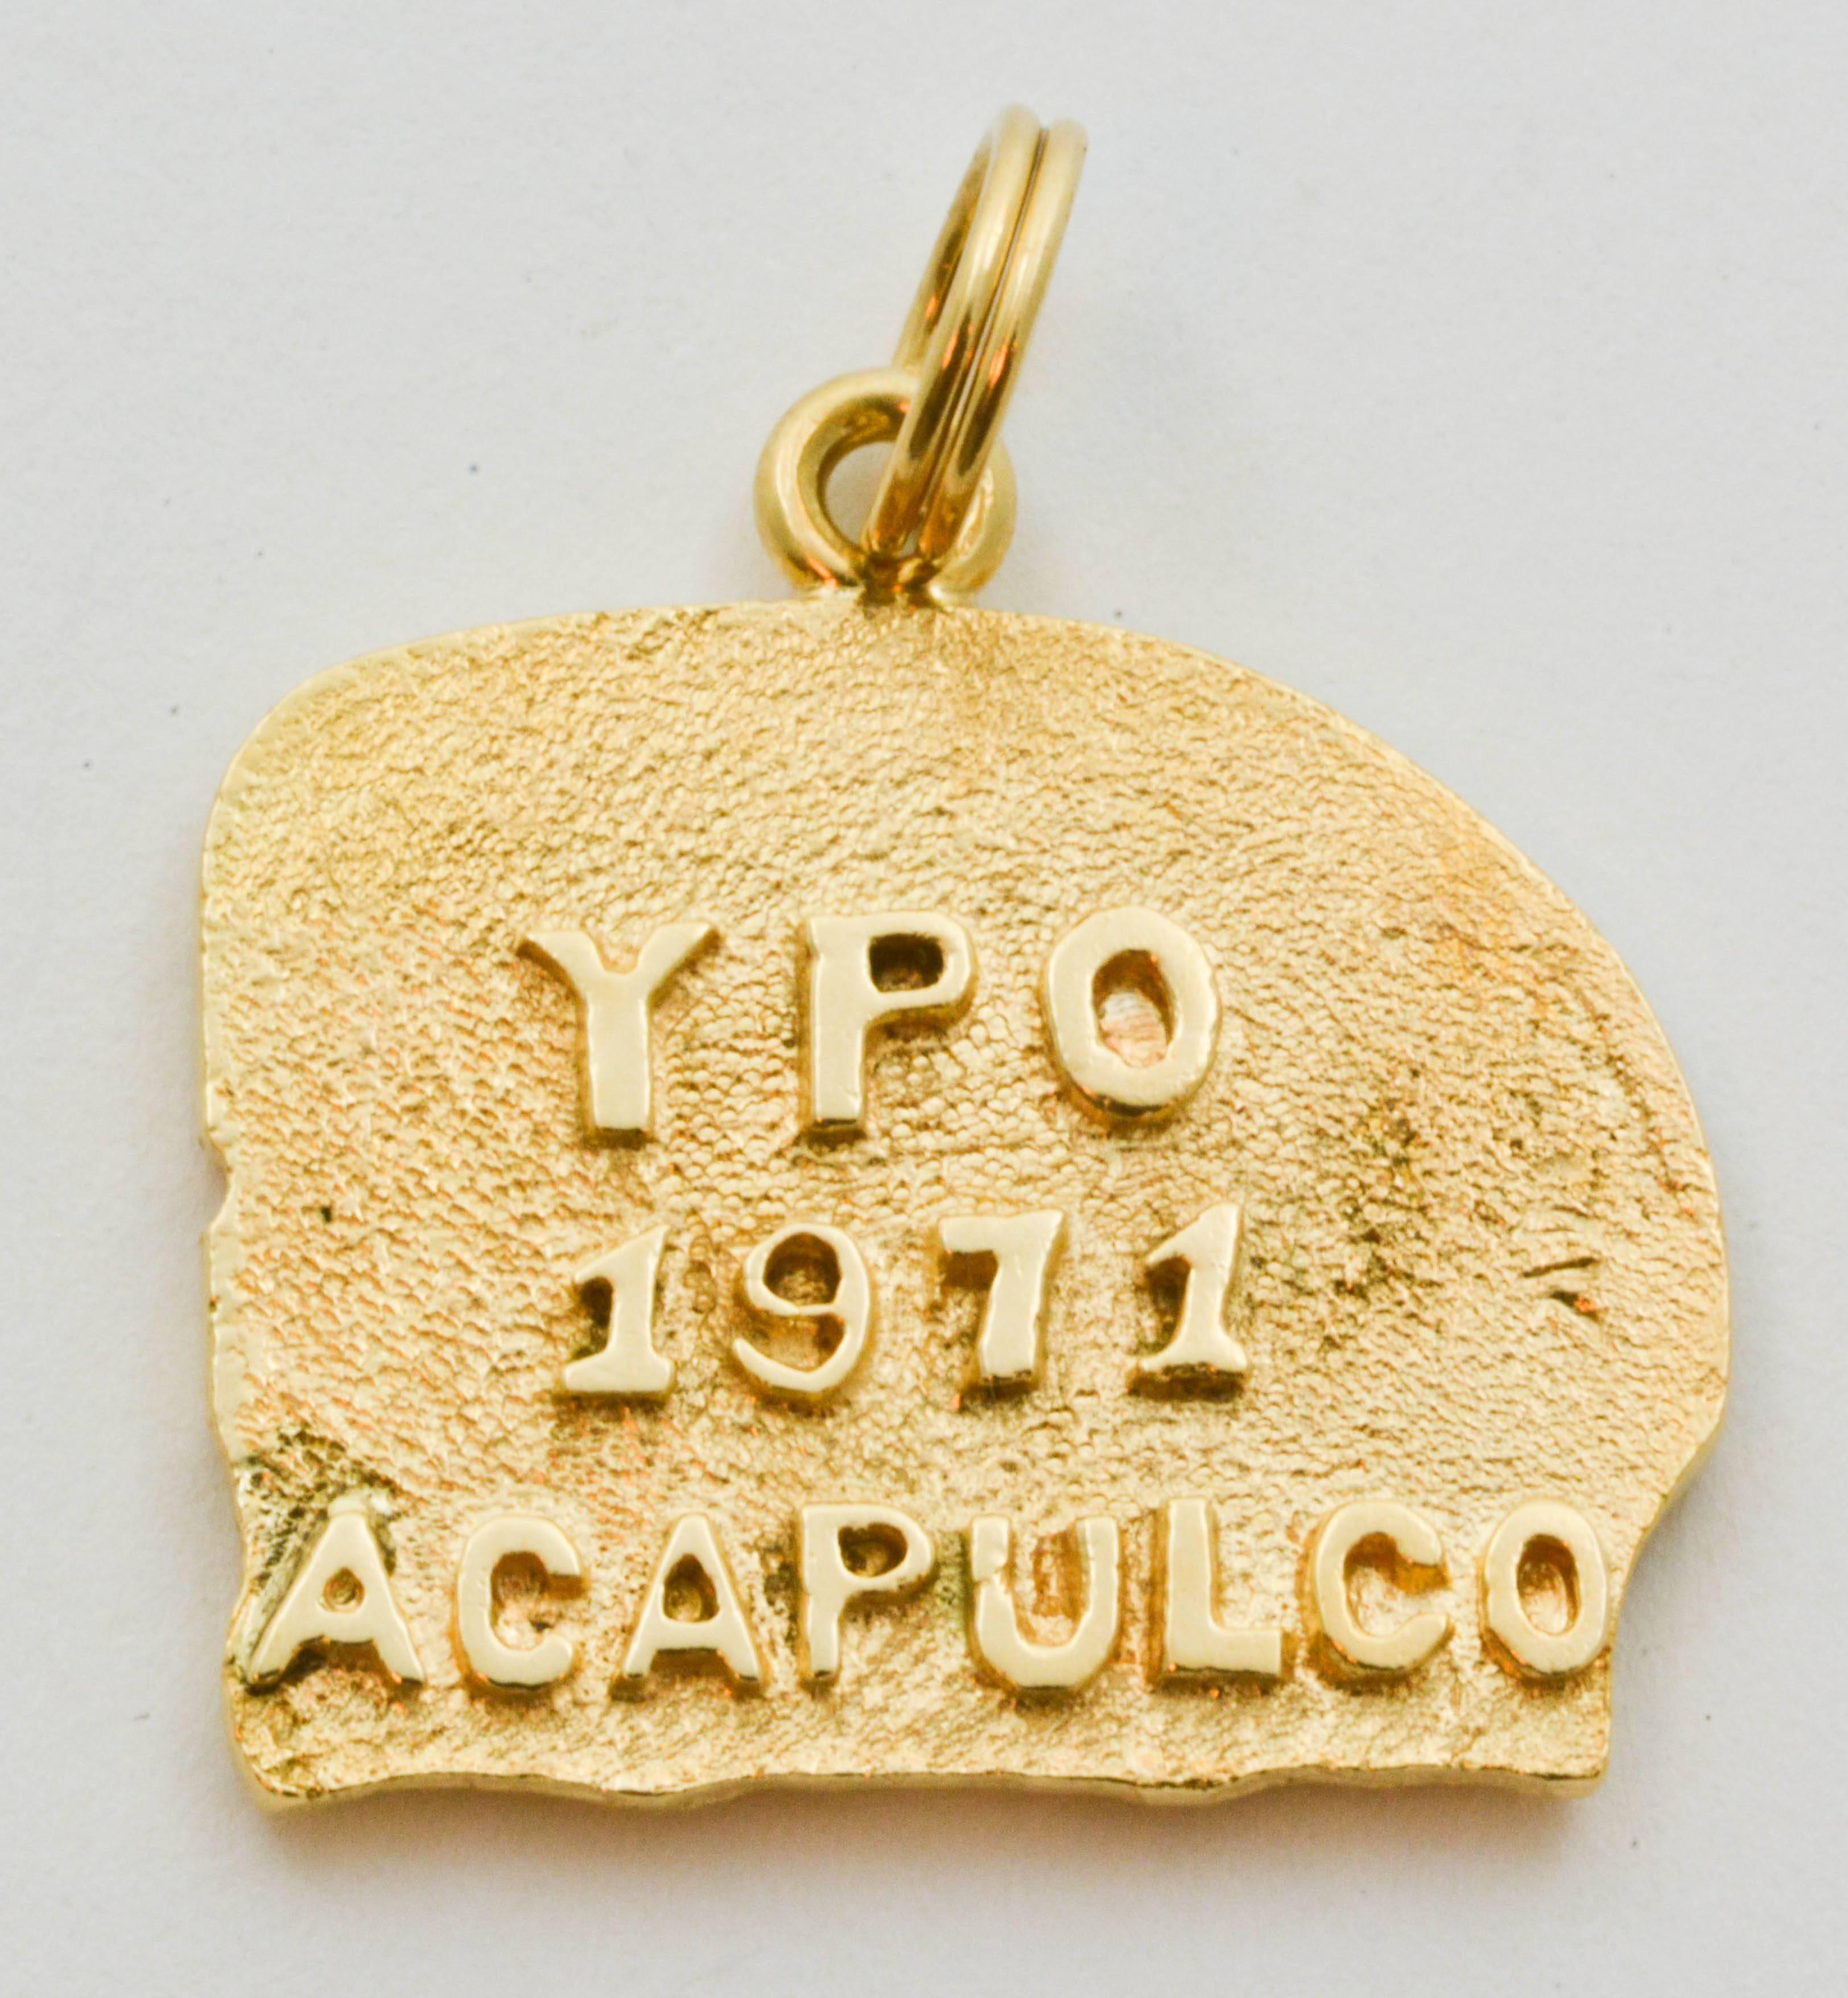 This charm is crafted with an ancient American style and features a depiction of a posing bird. The reverse of the charm is embossed with the words “YPO 1971 Acapulco.” The charm measures 17.10x21.22x2.28mm and weighs 5.9g.